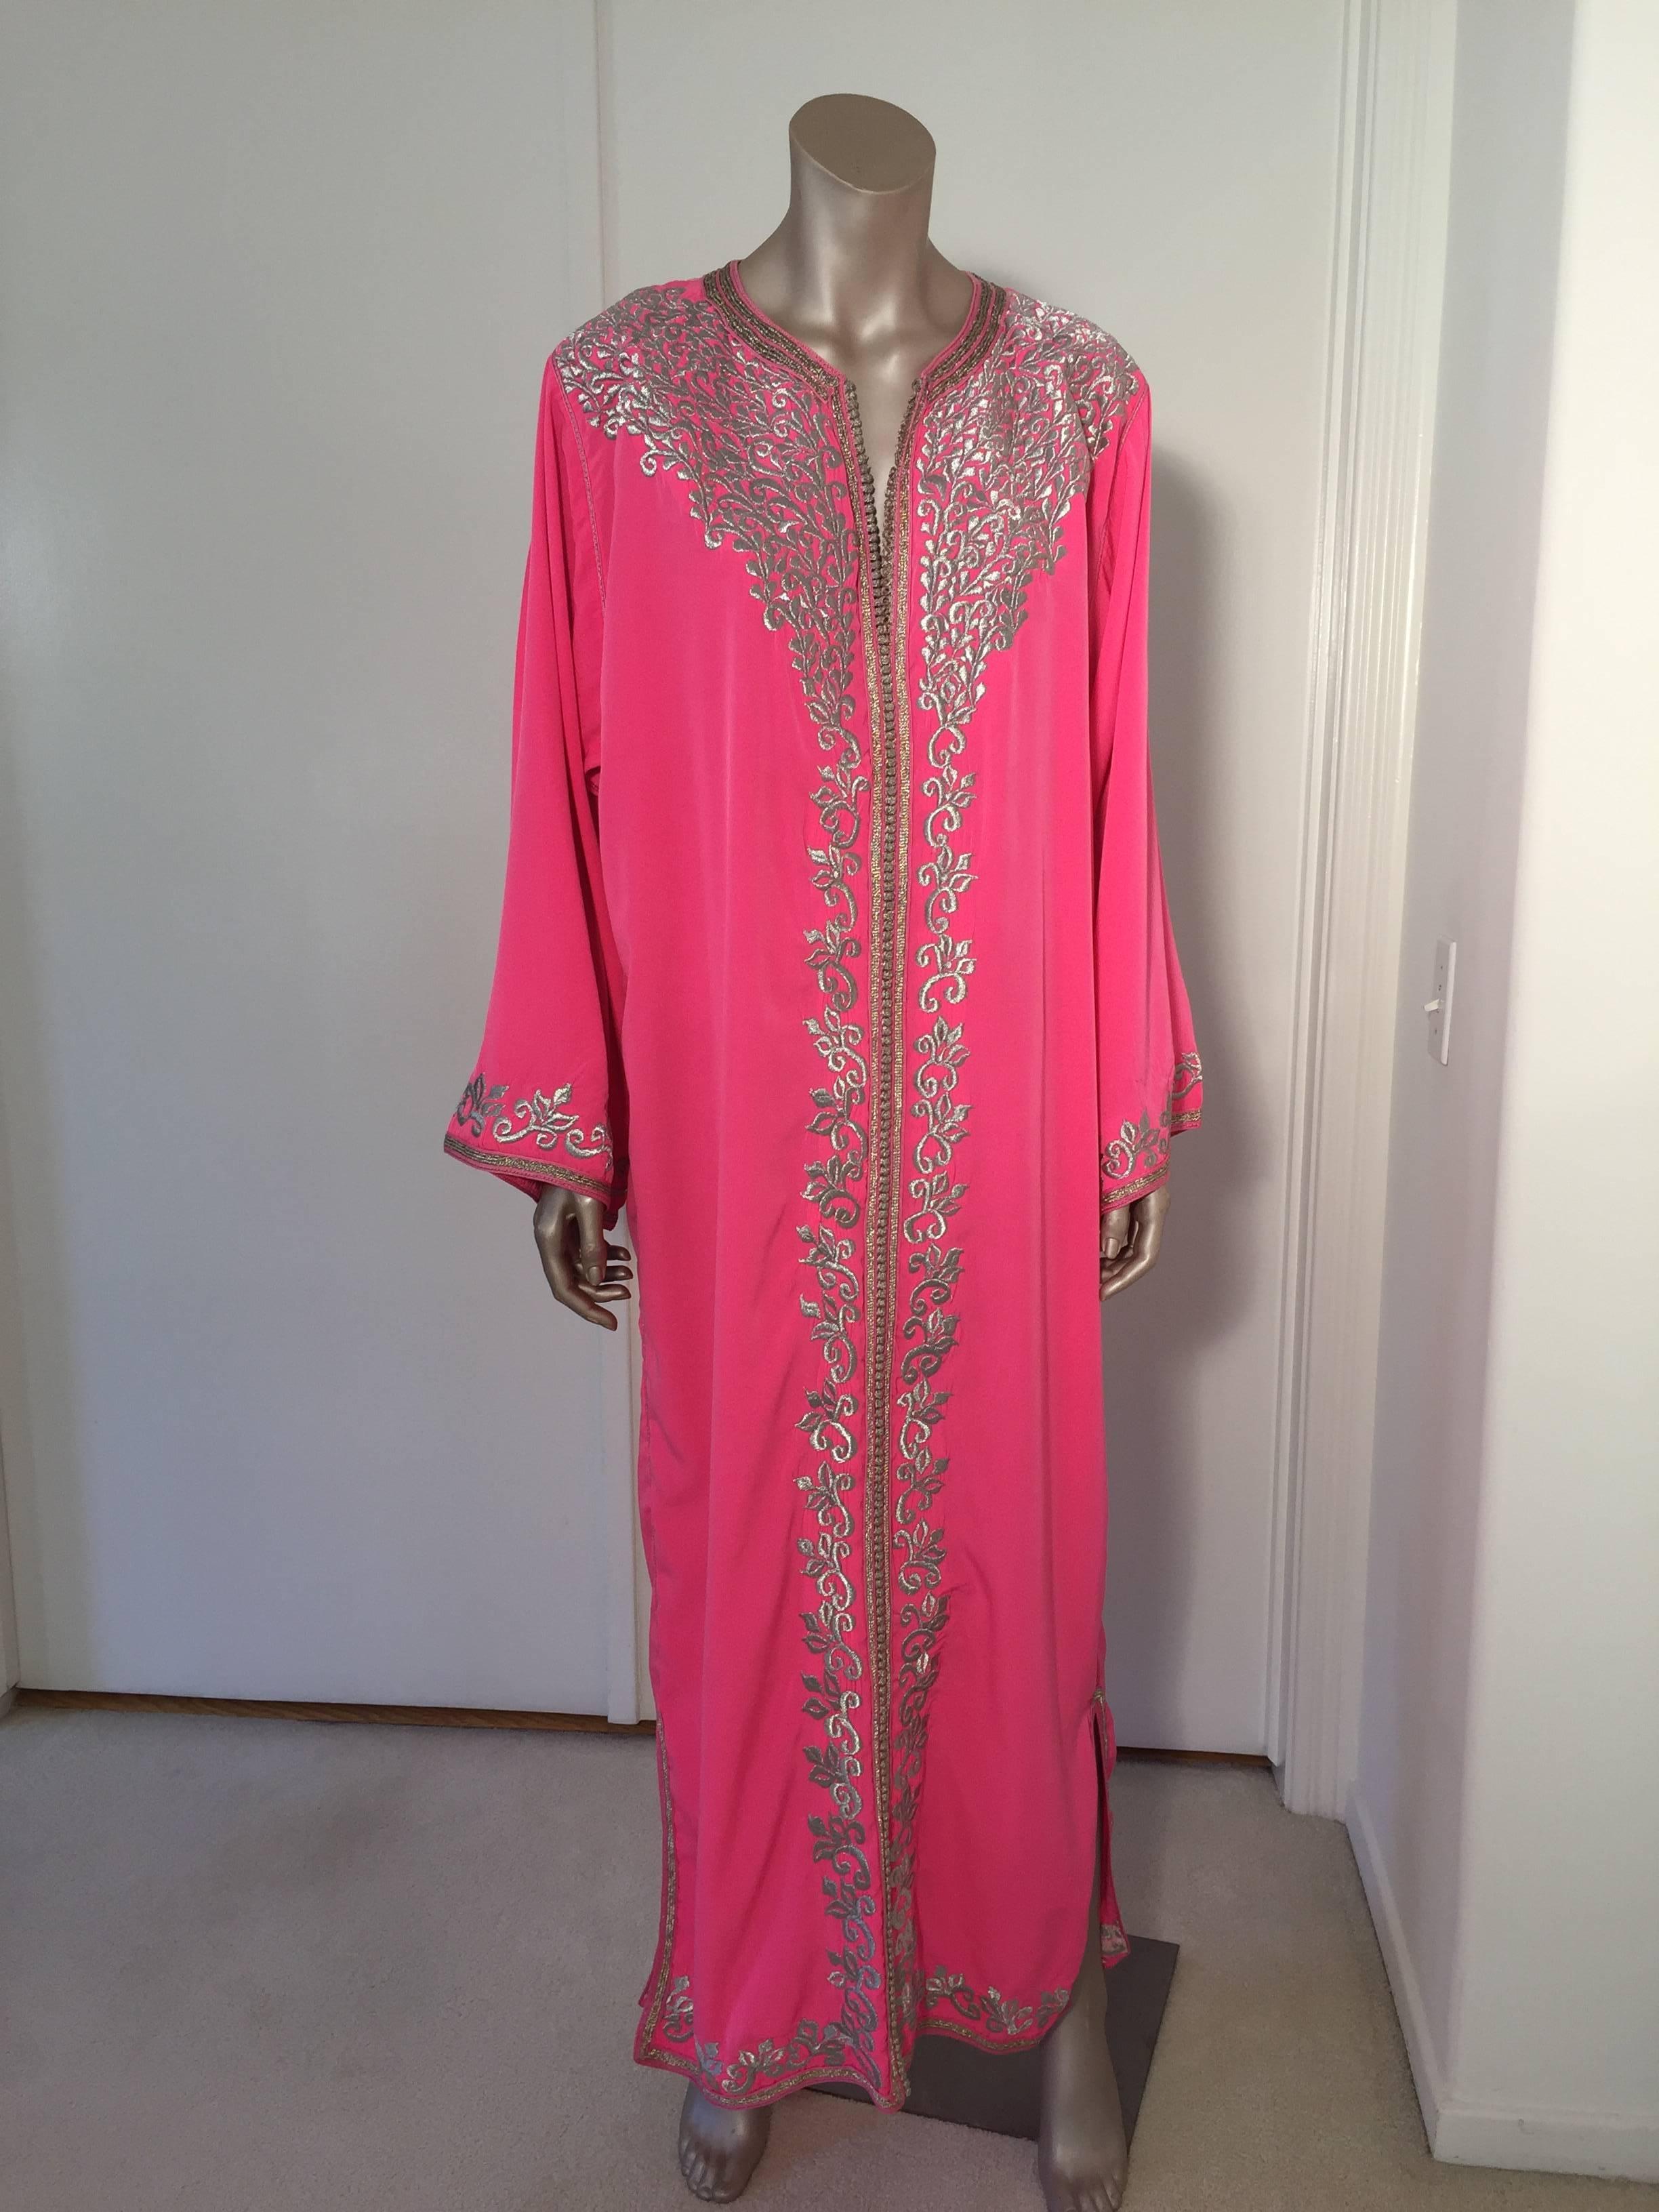 Elegant vintage Moroccan caftan, embroidered with metalic silver threads design all-over. 
One of a kind evening Moroccan Middle Eastern gown.
This maxi dress kaftan features a traditional neckline, with side slits and gently fluted embellished